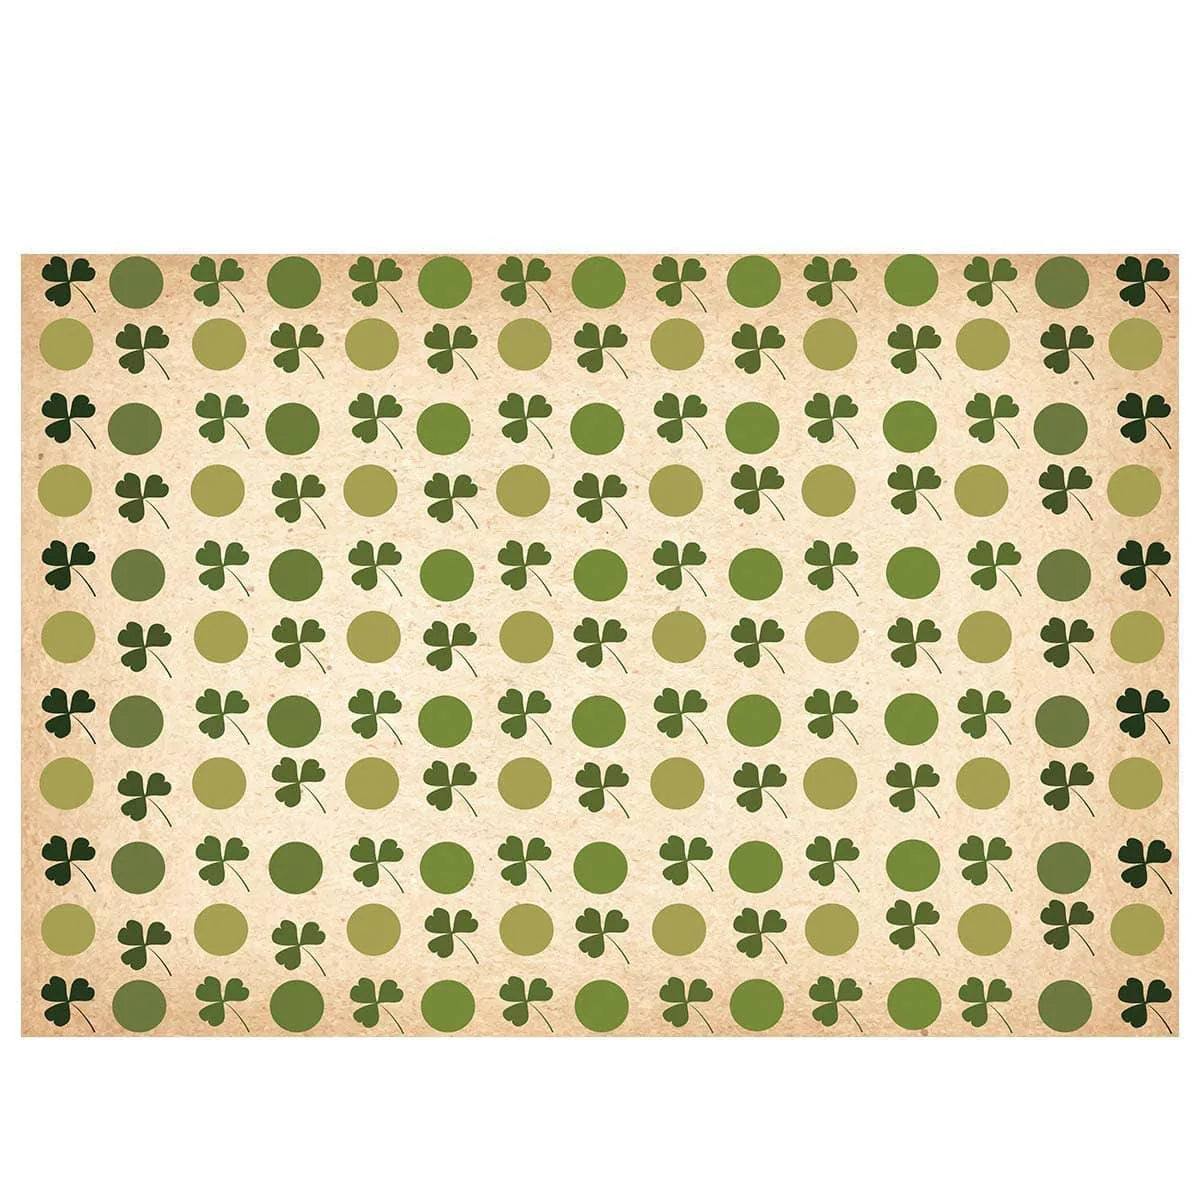 Allenjoy St.Patrick's Day Clover and Dots Step and Repeat Backdrop - Allenjoystudio